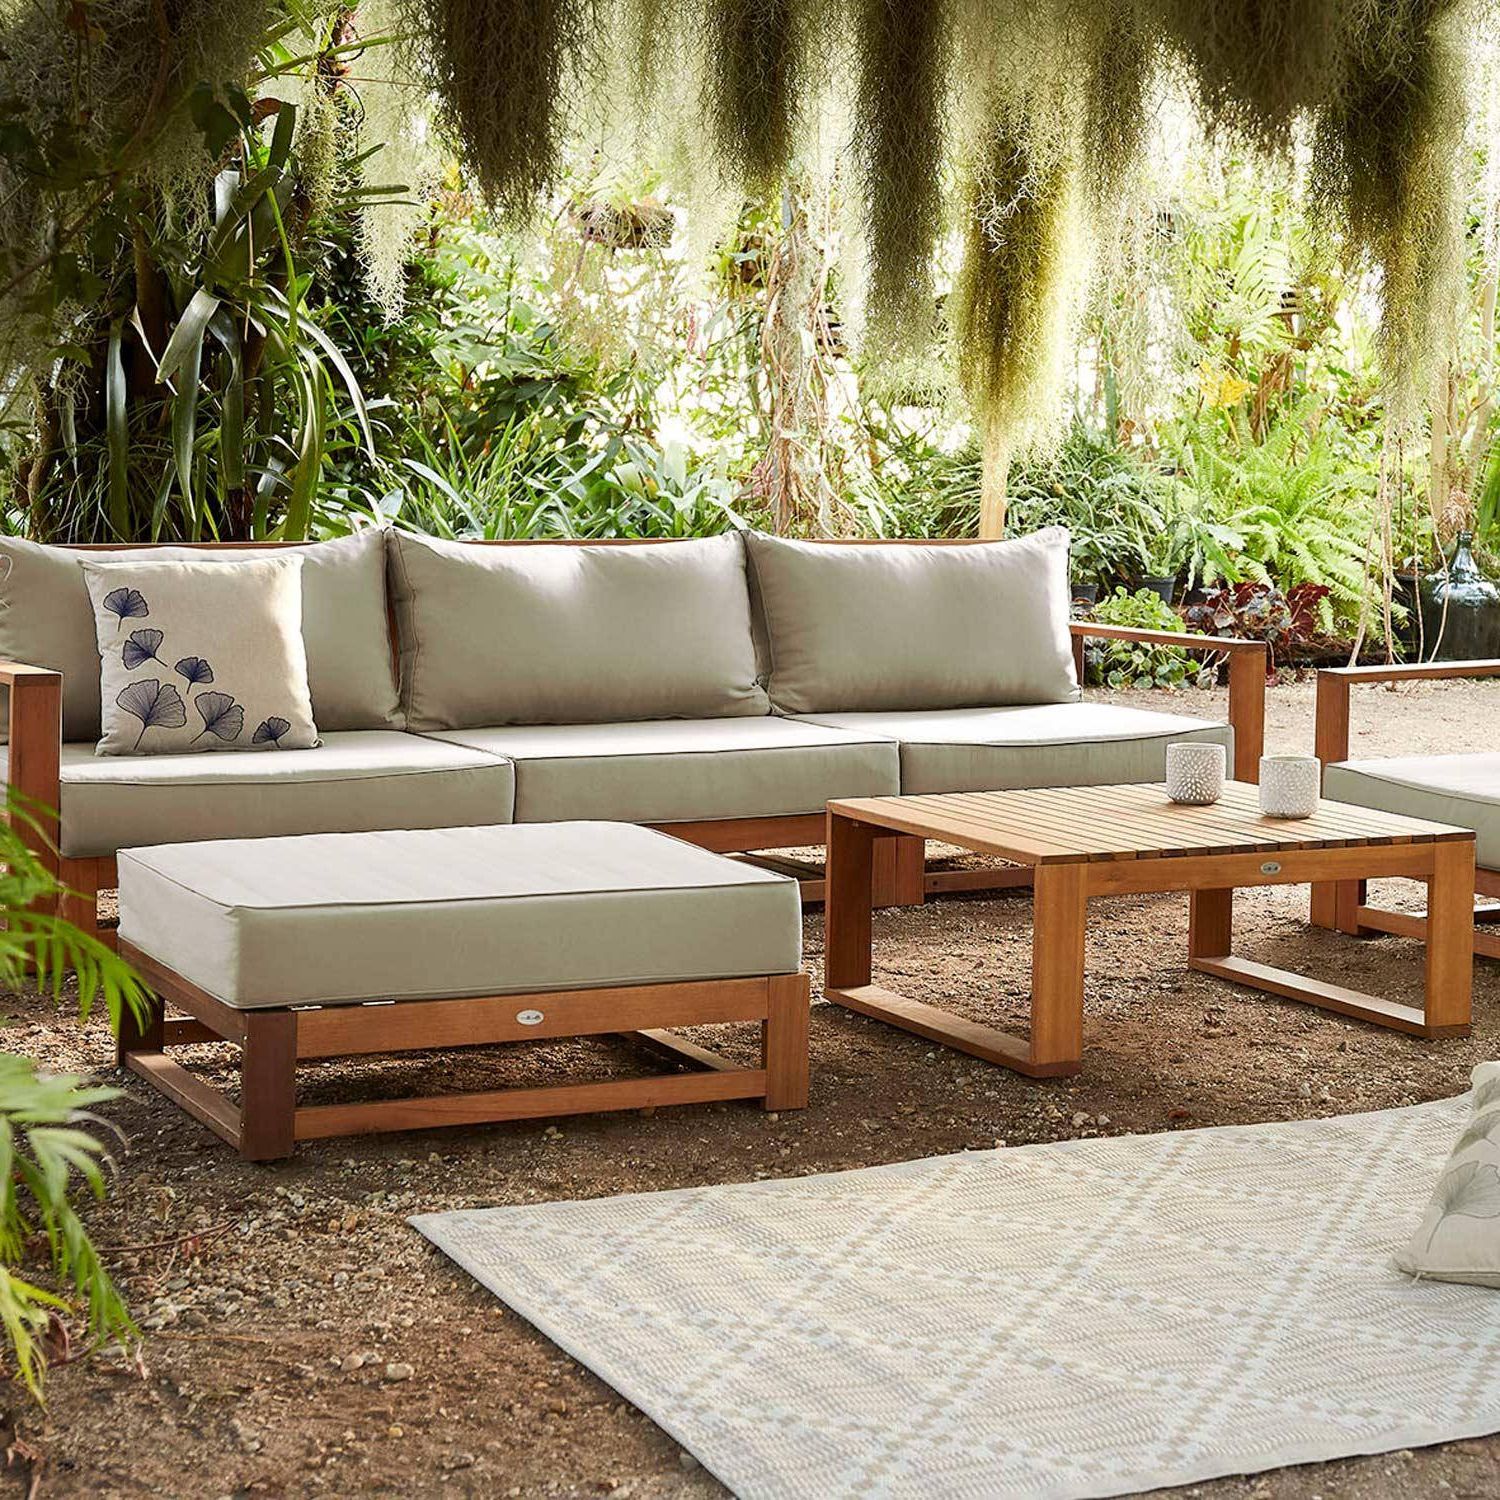 Most Recent 5 Seater Wooden Garden Sofa – Mendoza – Beige Cushions, Sofa, Armchairs And  Coffee Table In Acacia Wood Intended For Wood Sofa Cushioned Outdoor Garden (Photo 6 of 15)